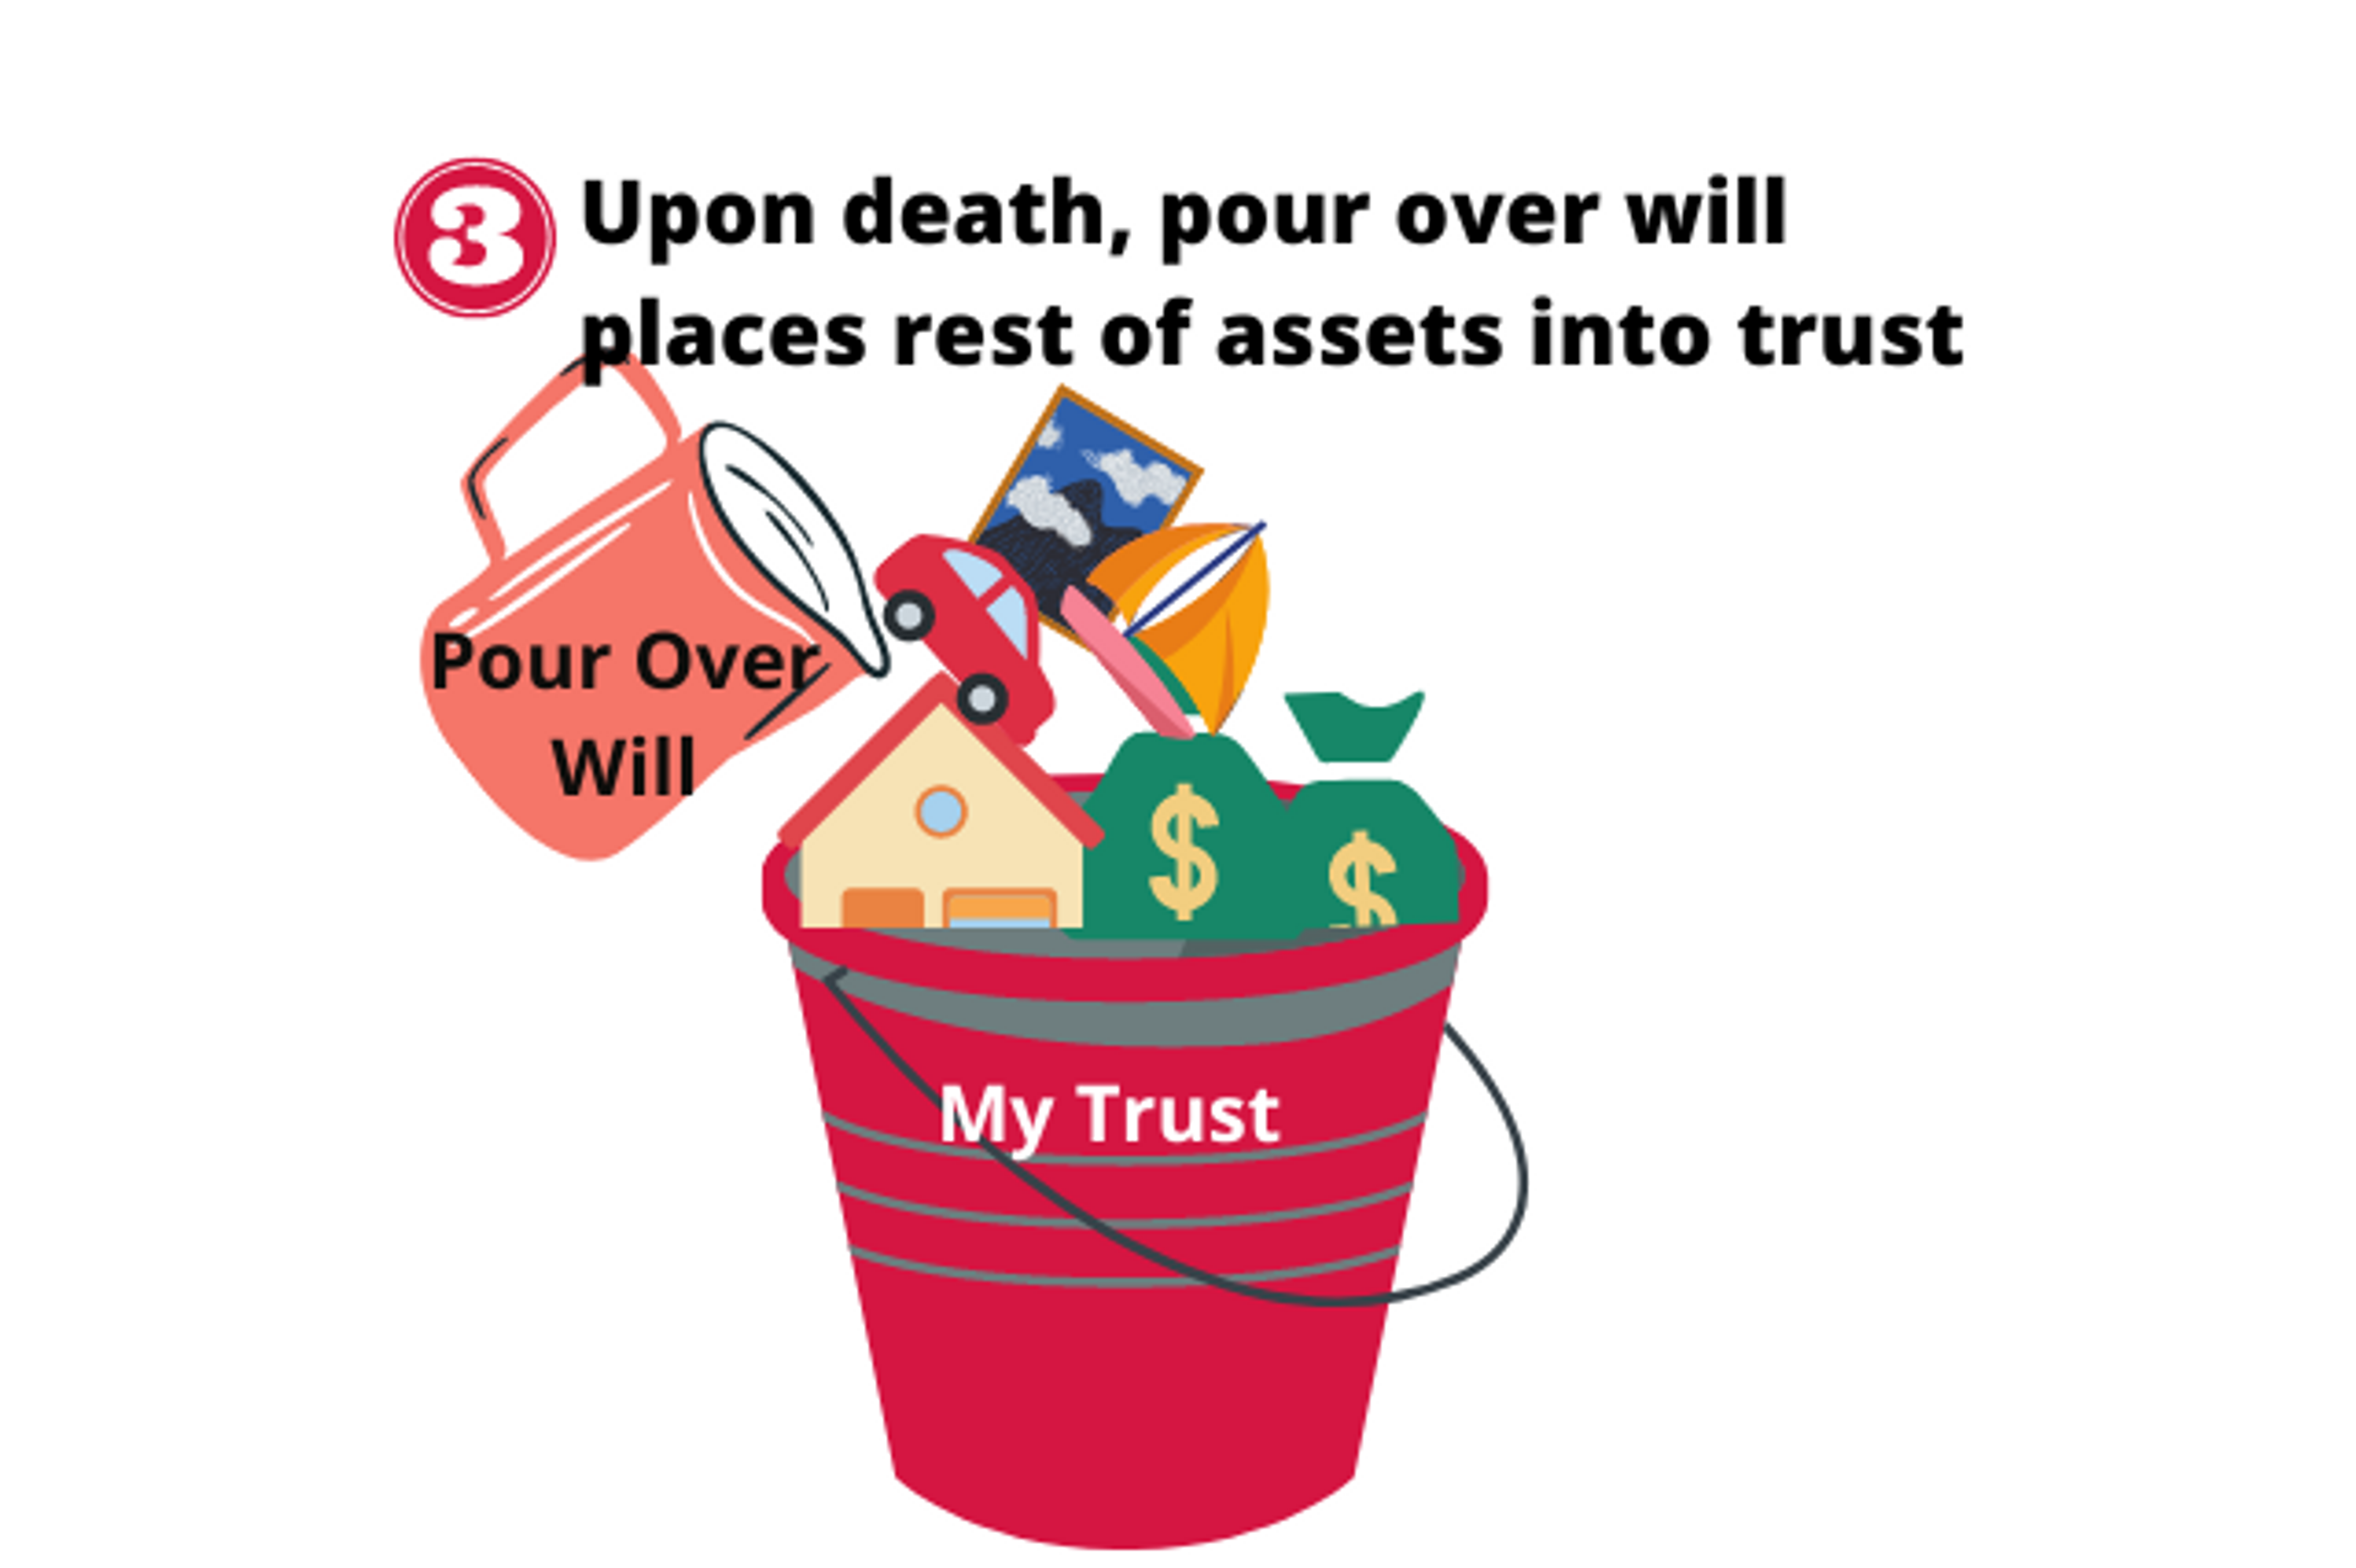 Step 3: Pour Over Will "pitcher" funds additional assets into the trust bucket